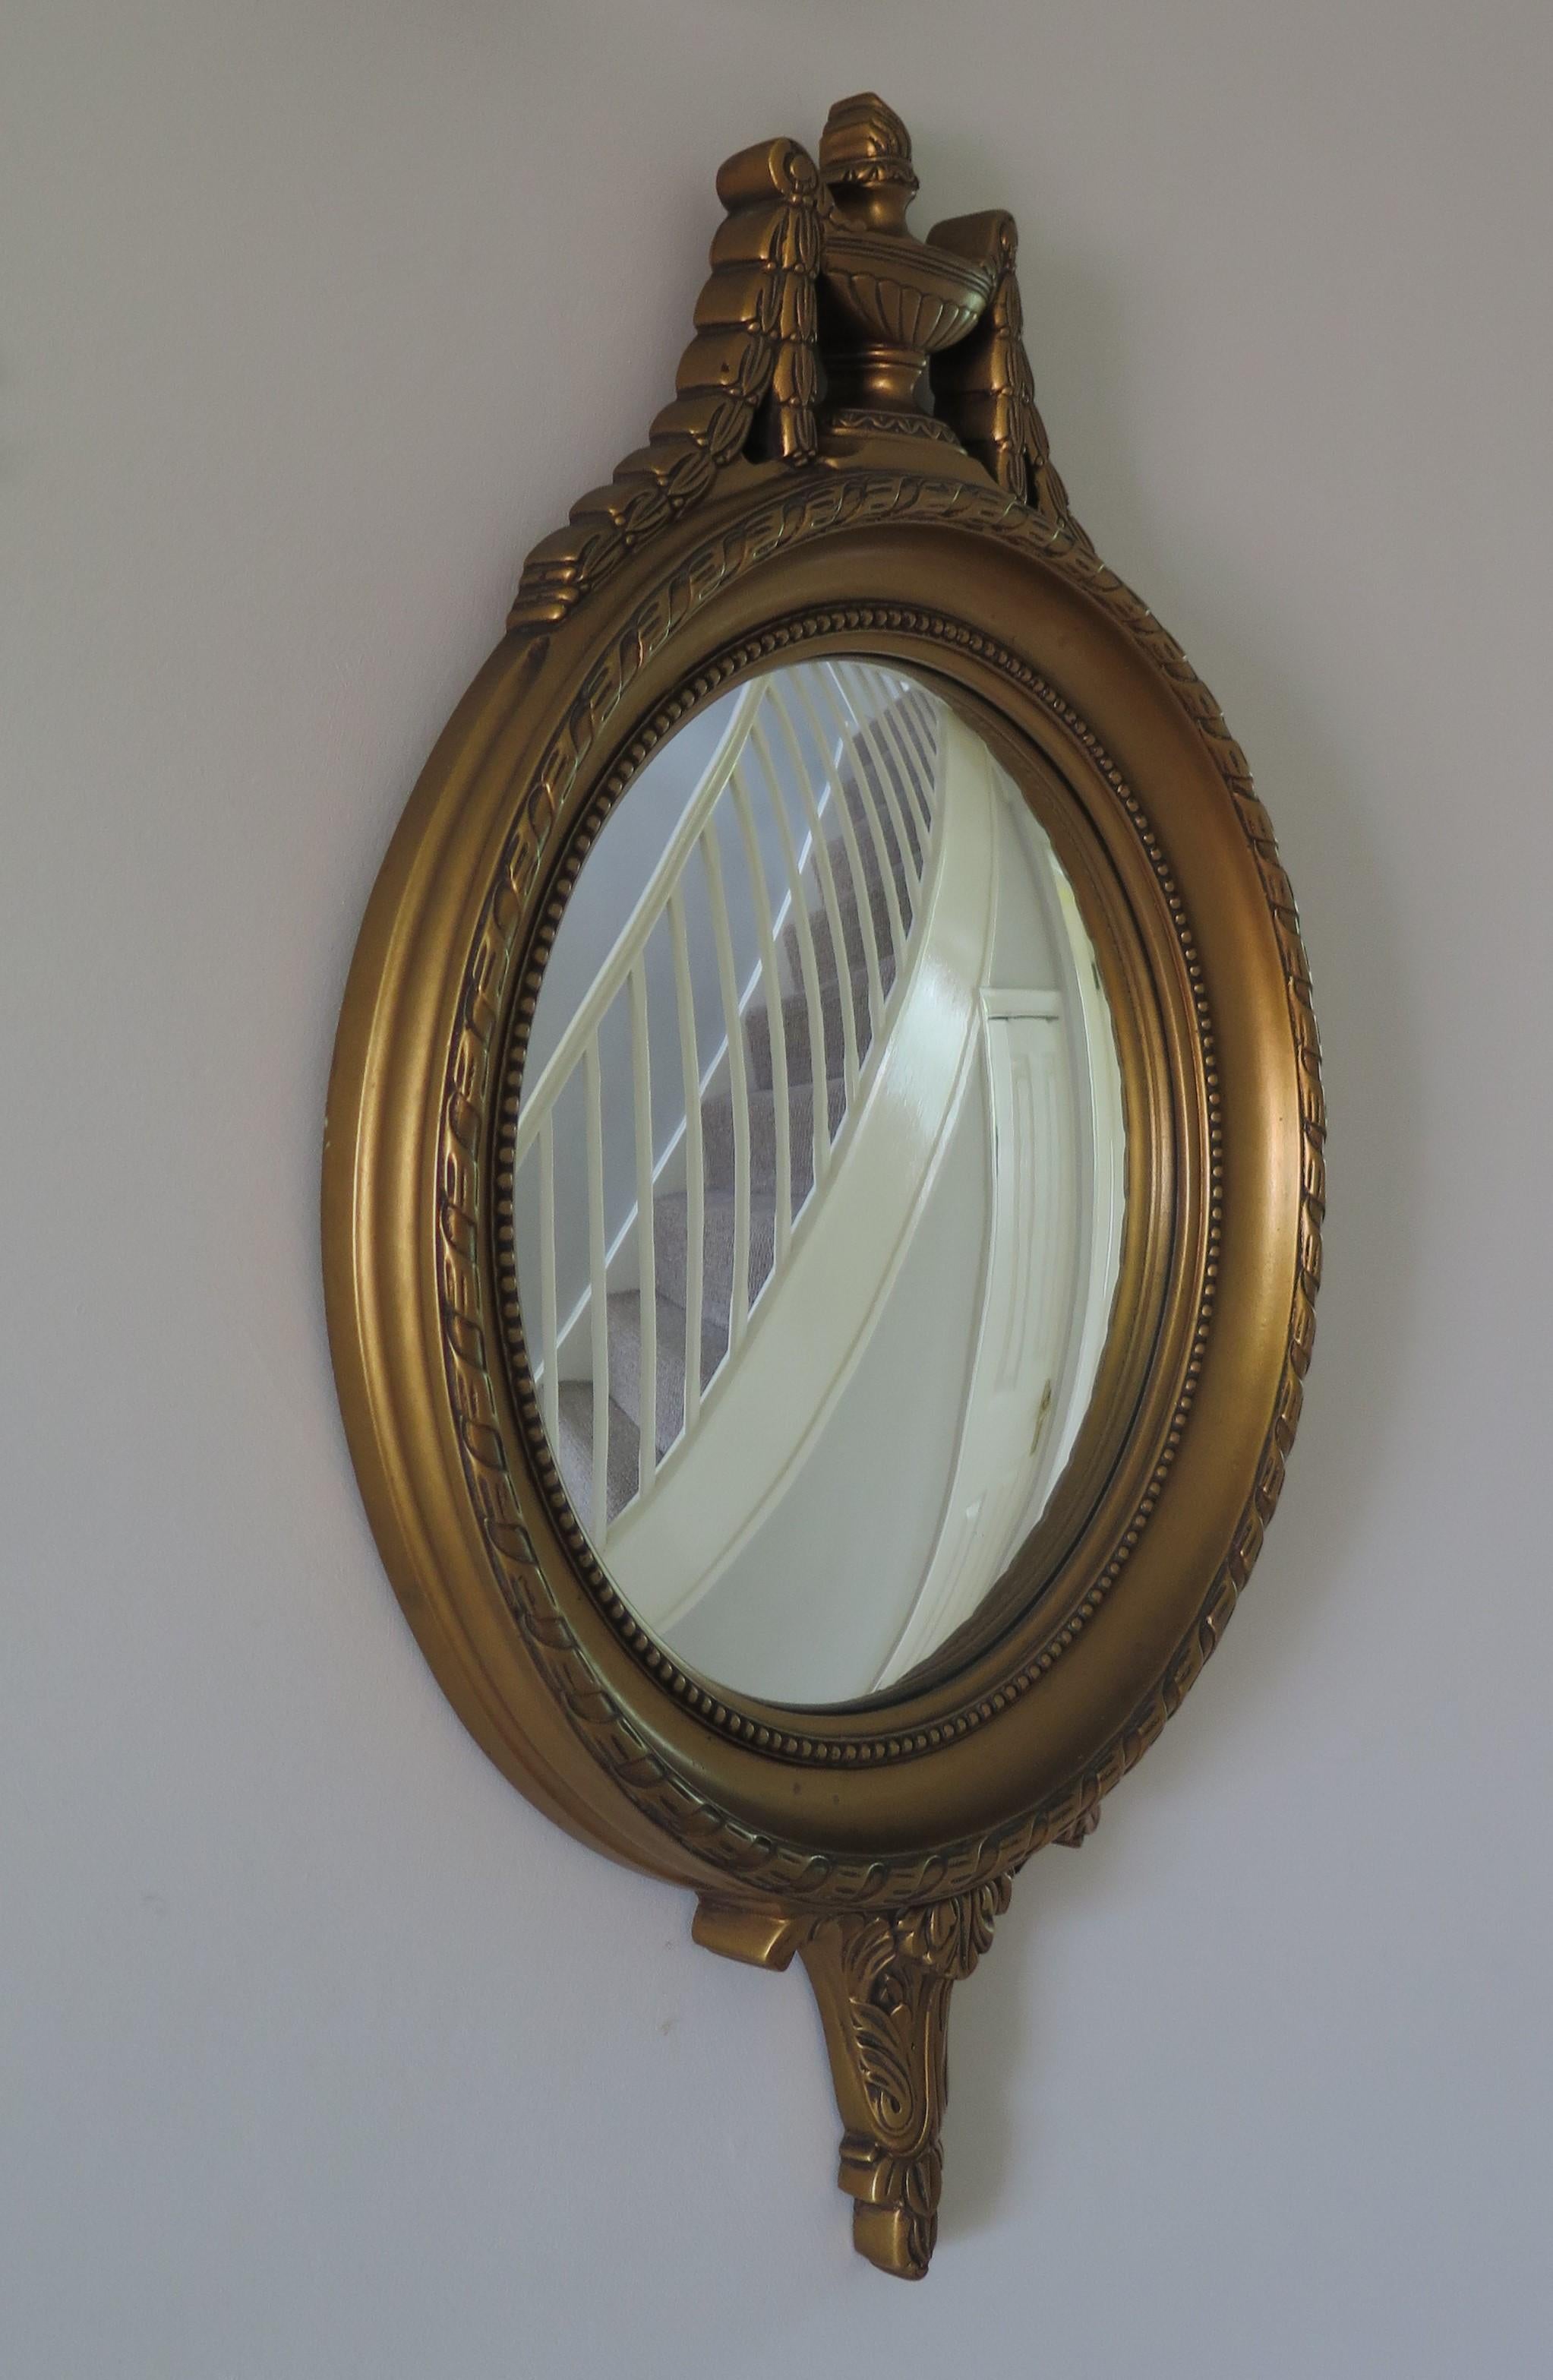 This is a beautiful French convex circular wall mirror in the Empire style of the early 19th century, which we date to Circa 1930s.

The mirror is of good quality with very good detail. 

The convex mirror plate is in very good condition.

The